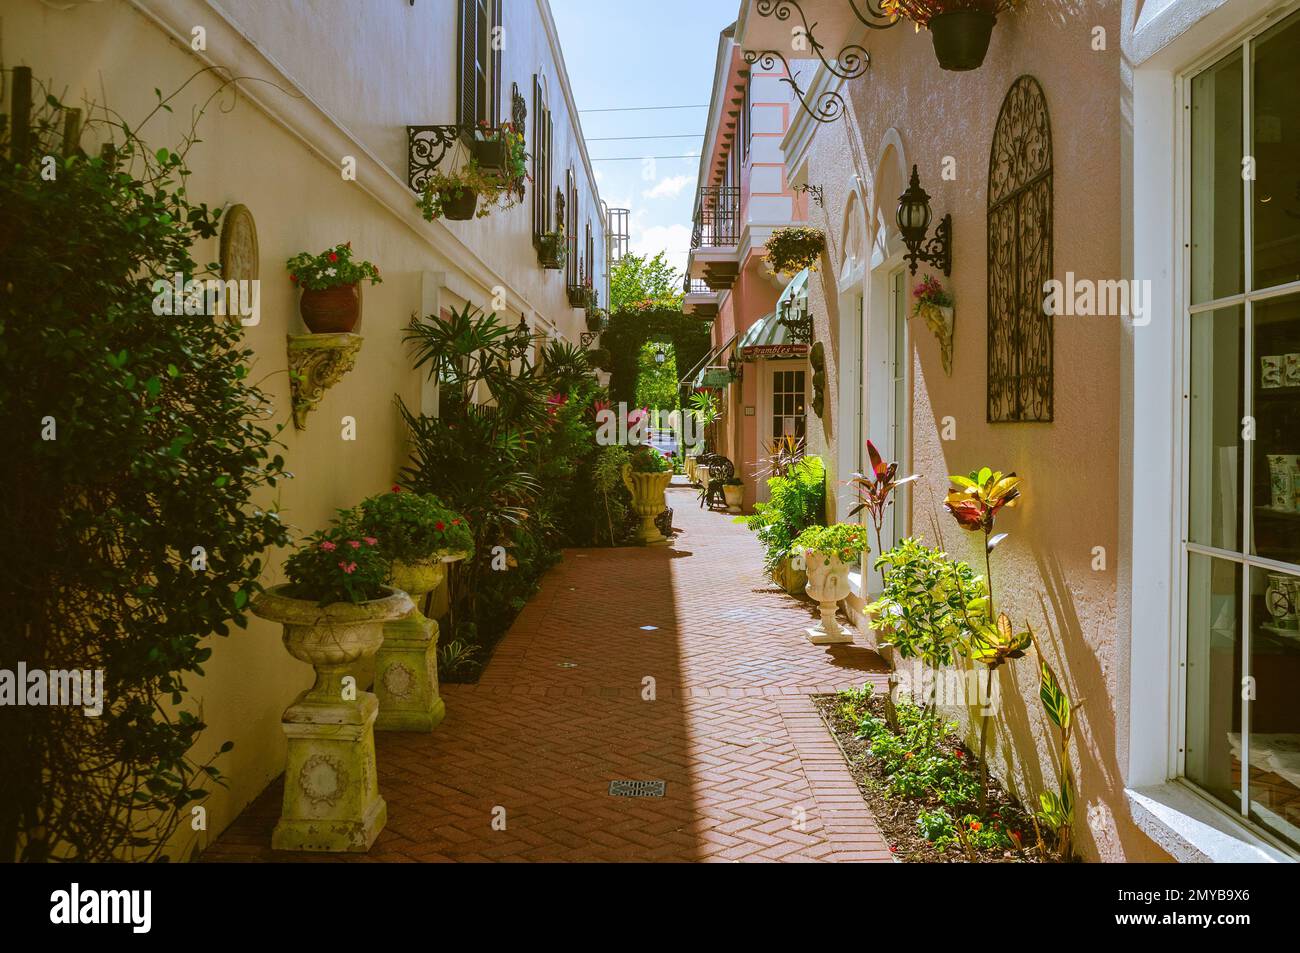 A beautiful view of a narrow path decorated with plants in stone plinths, between buildings Stock Photo